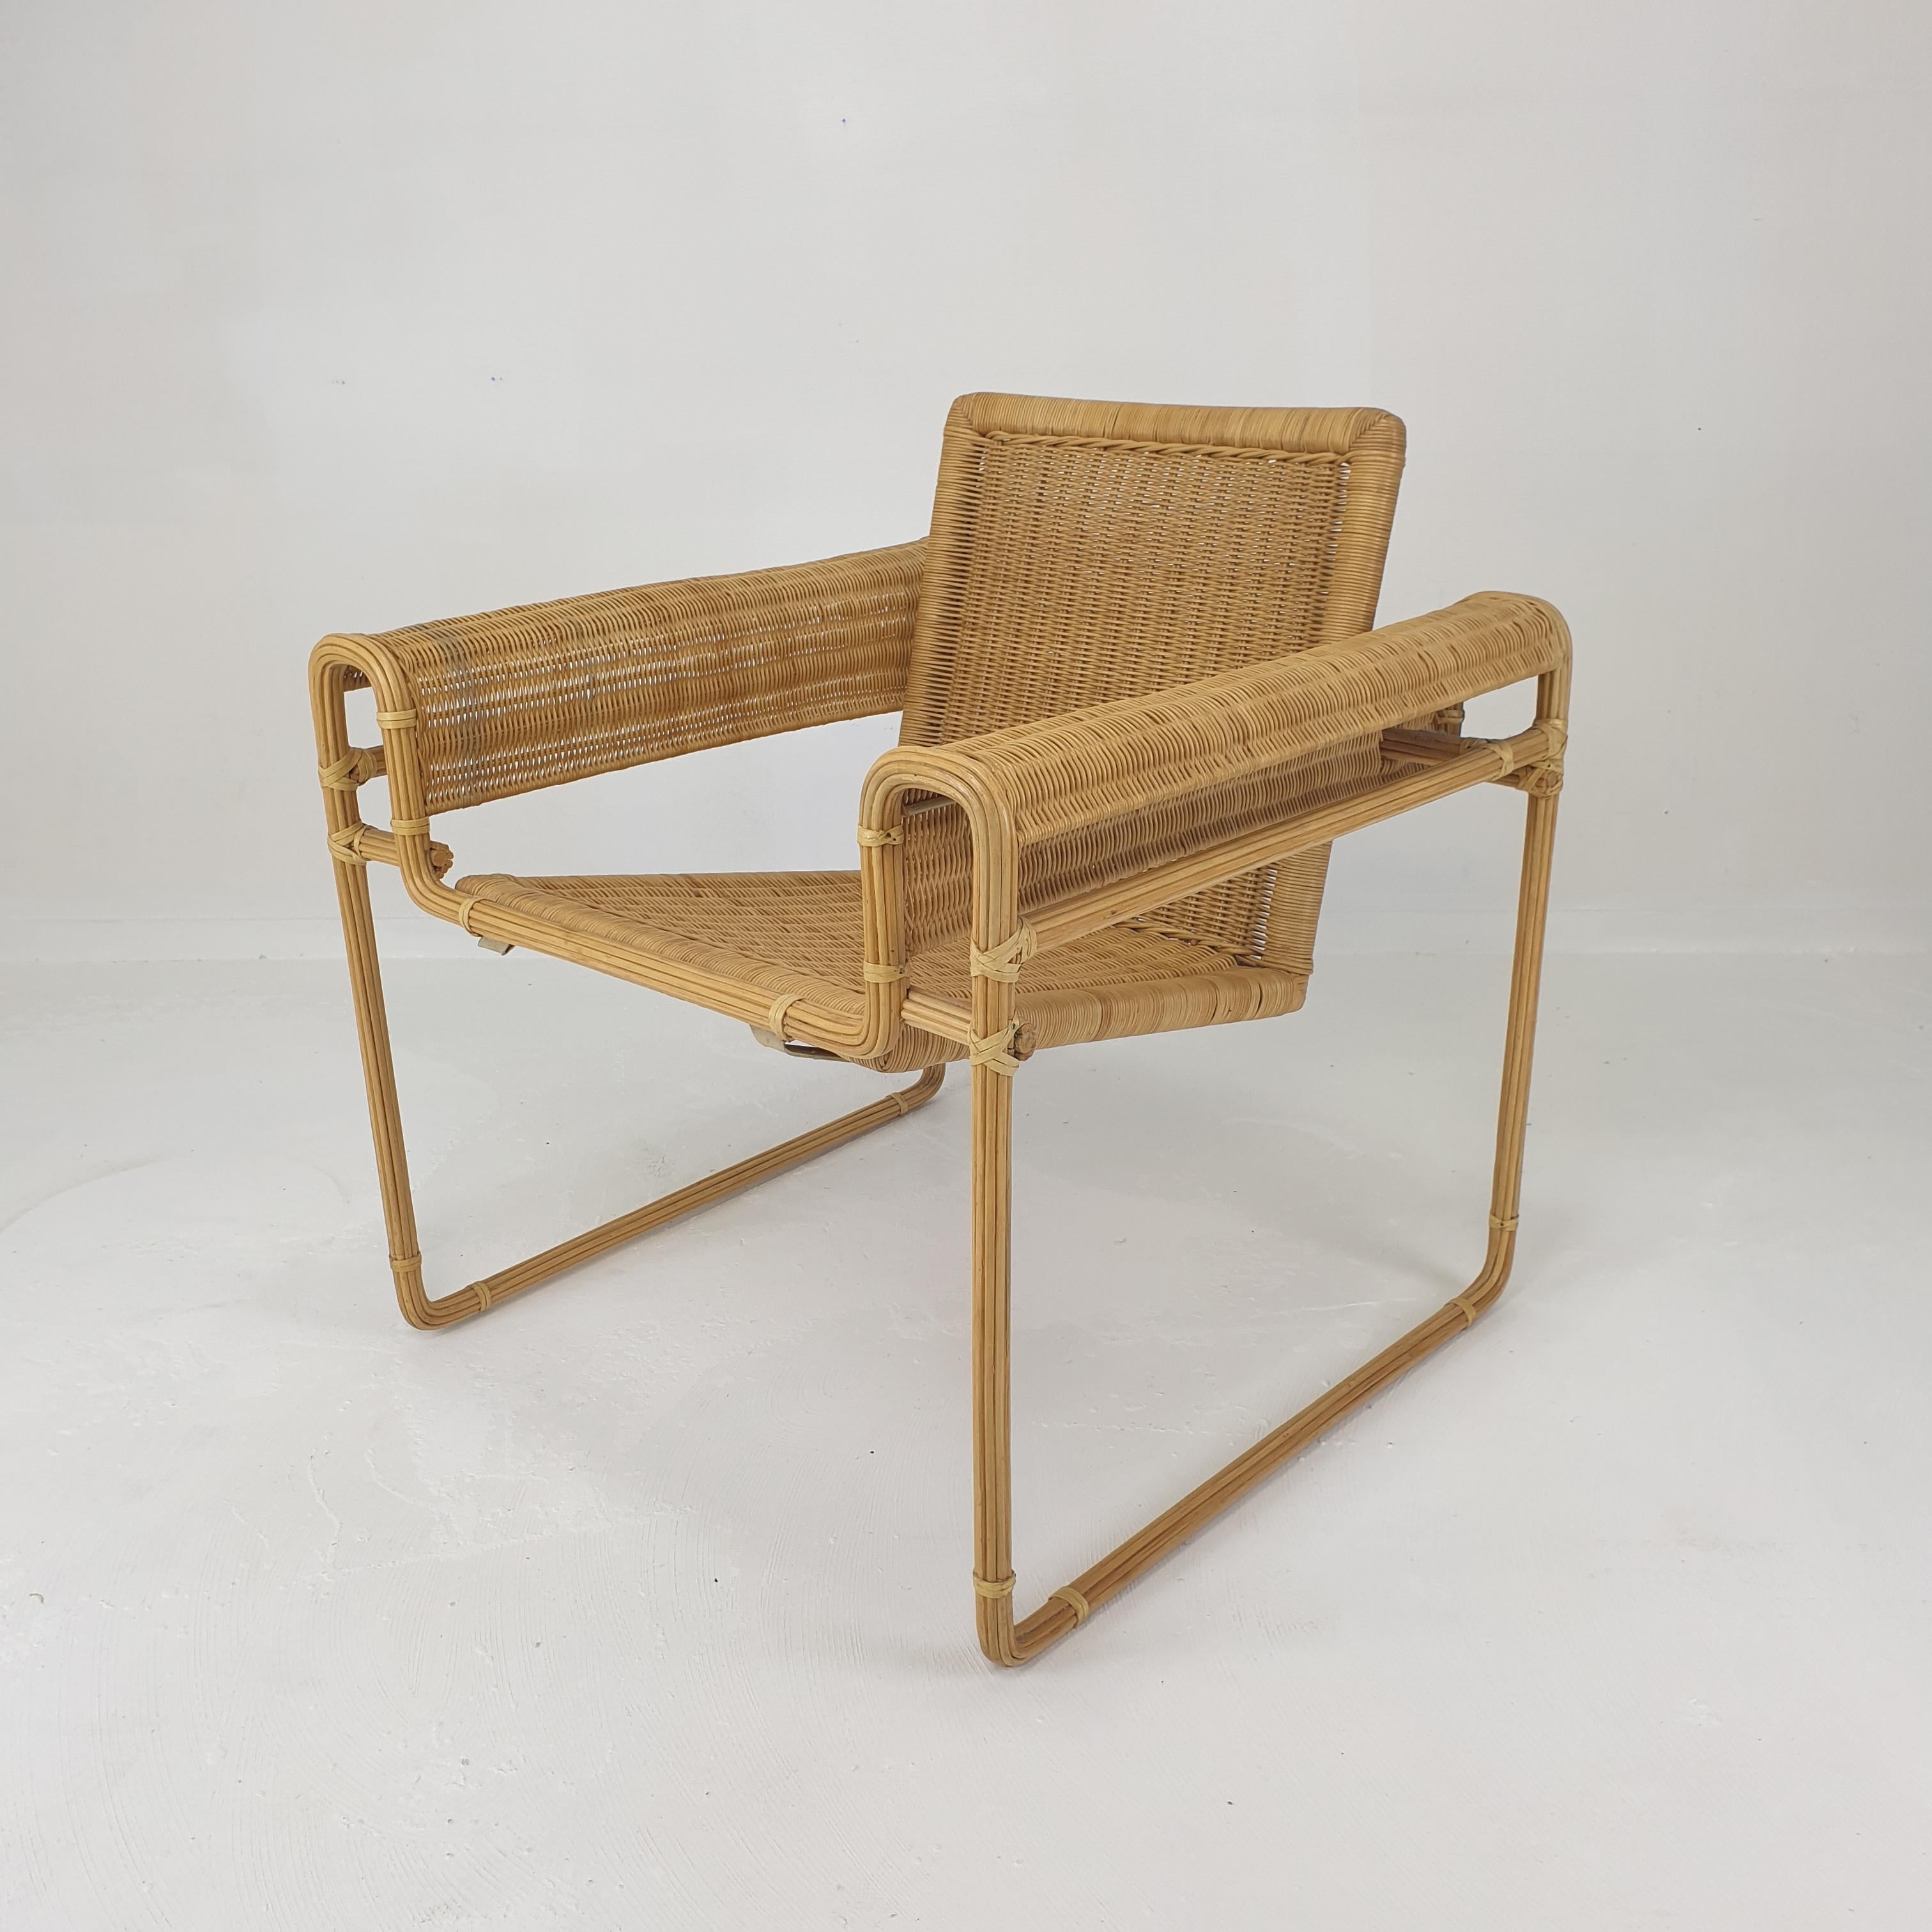 A very rare pair of wicker chairs, fabricated in The Netherlands, 1970's.
This is a unique translation of the Wassily chair by Marcel Breuer. 

The metal frame is covered with strips if lacquered bamboo, seating and back are handmade wicker.
All